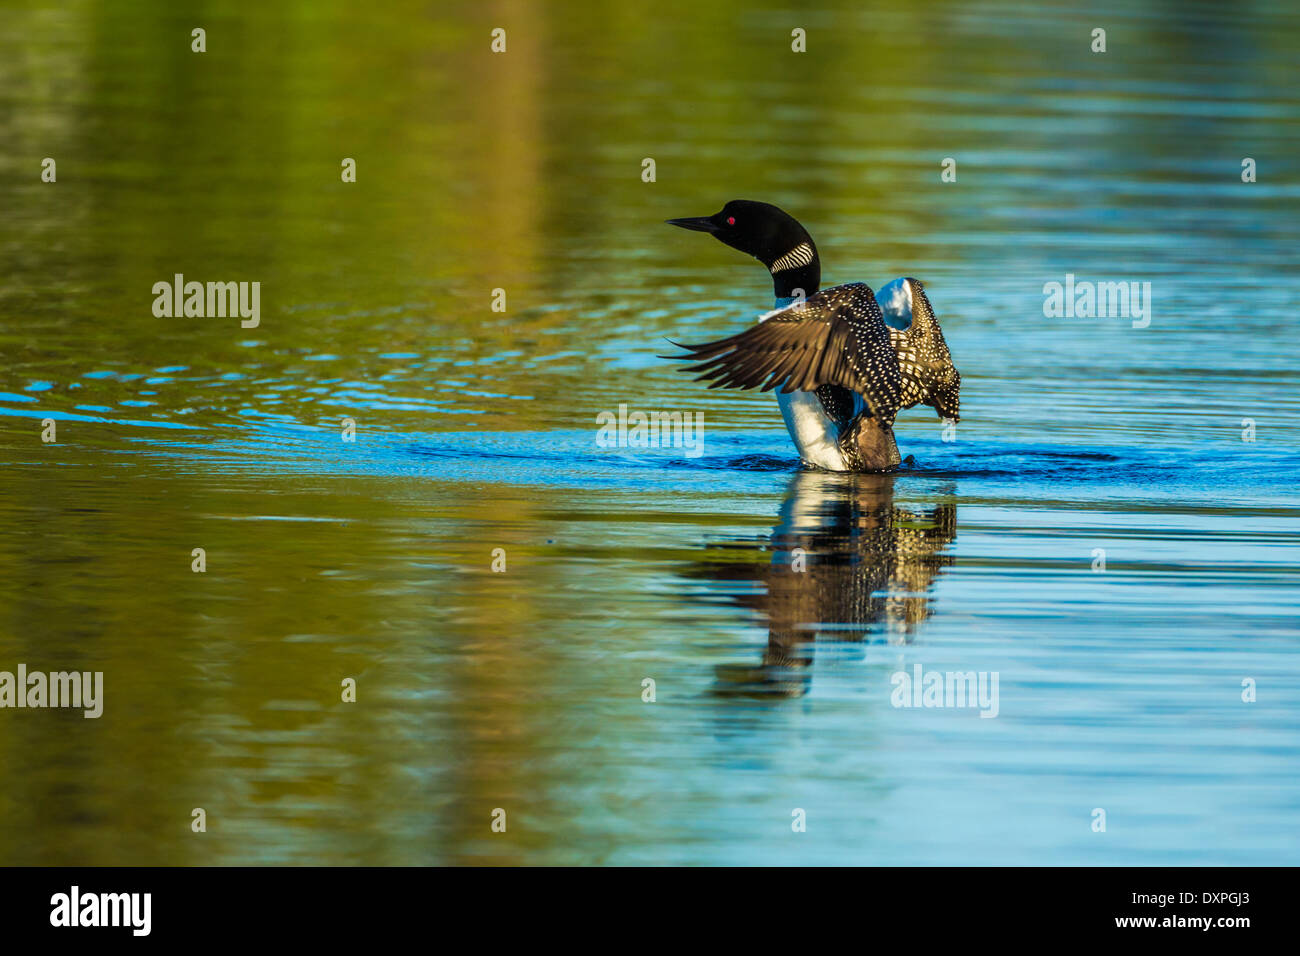 A Great Northern Loon swims and displays its breeding plumage on Wild Rose Lake in Kananaskis, Alberta, Canada. Stock Photo